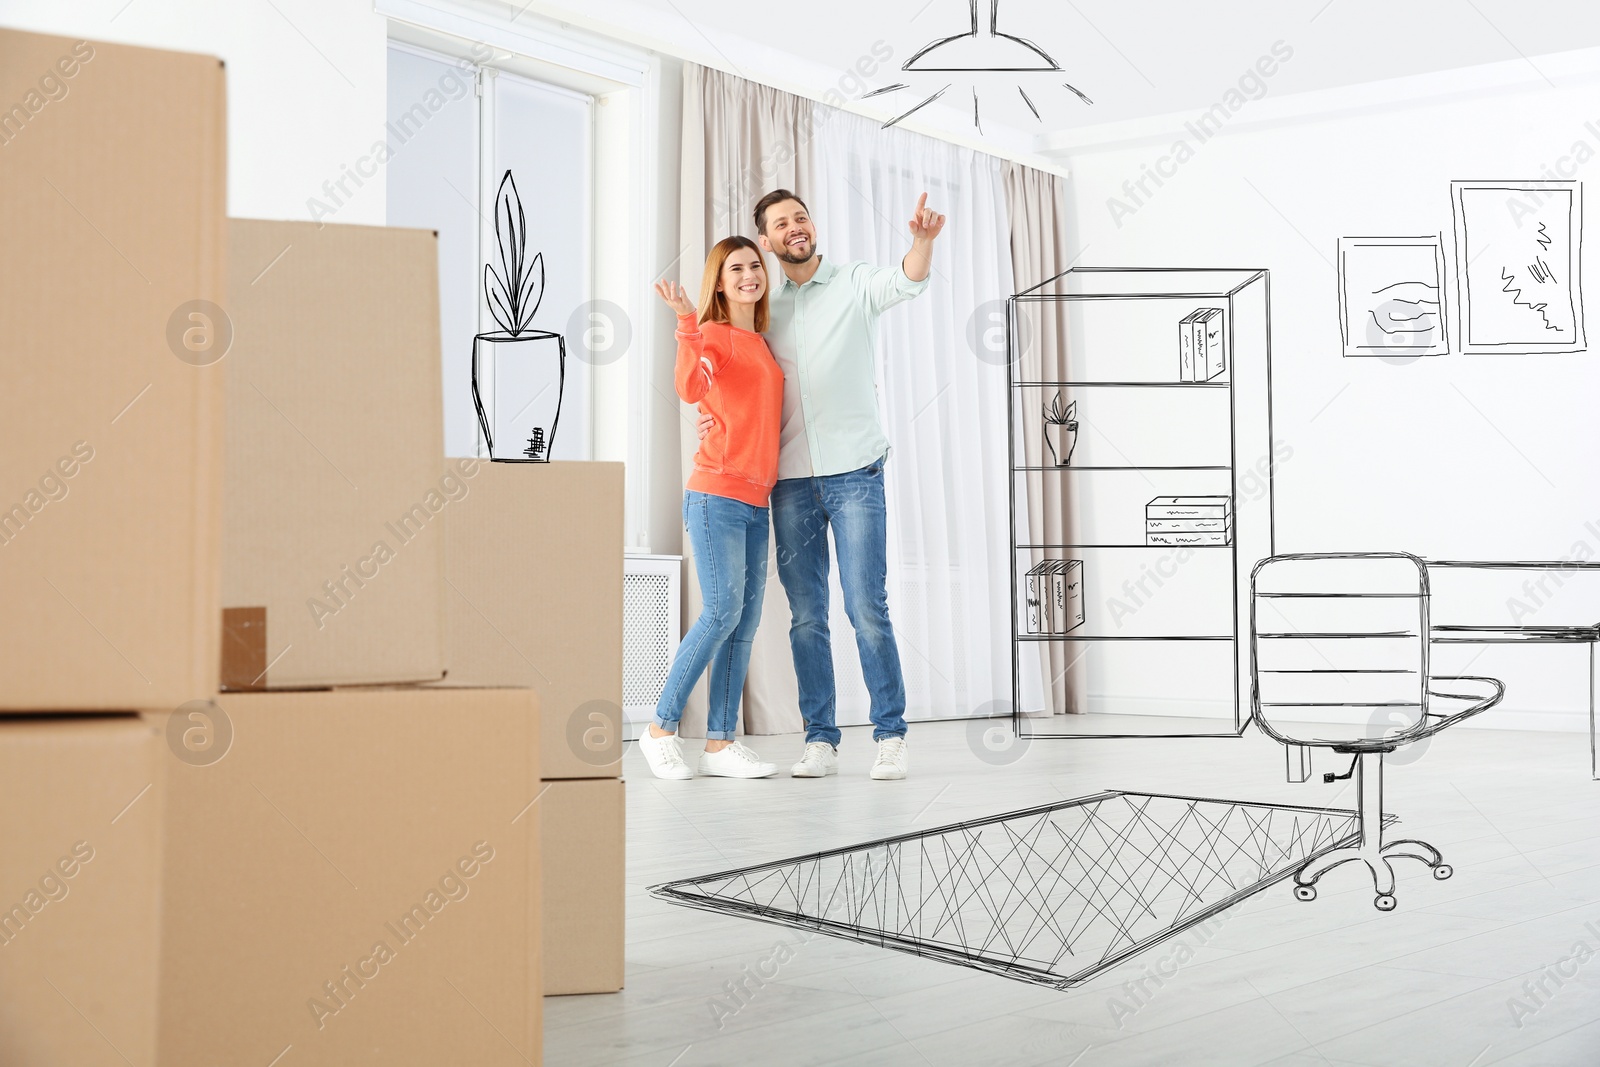 Image of Moving to new house. Happy couple imagining living room arrangement. Illustrated interior design